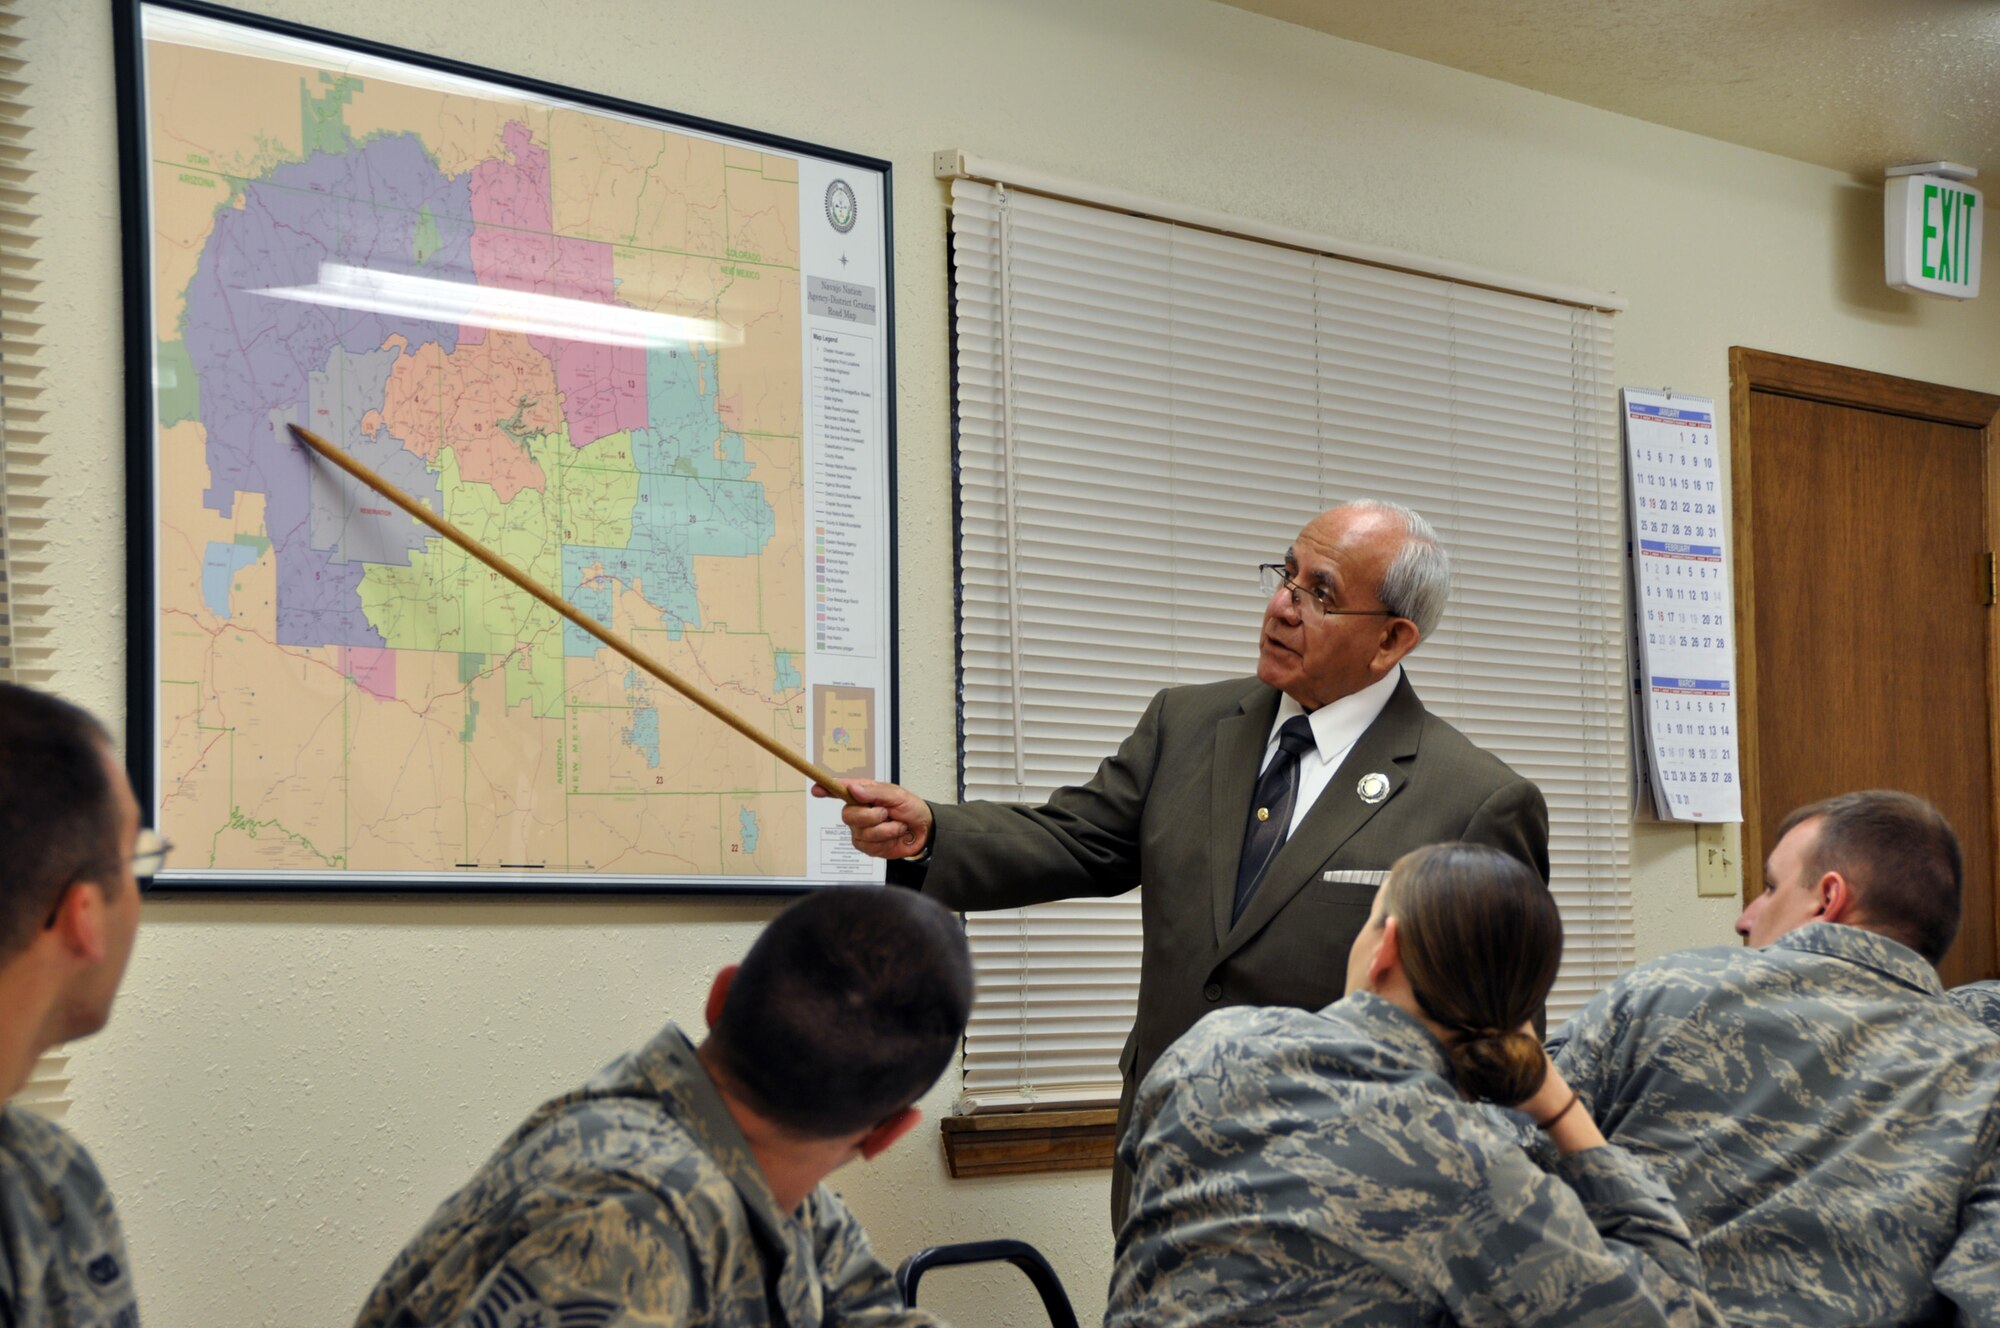 Joseph Esparza, director of the Southwest Indian Foundation’s projects office, explains to members of the 911th Civil Engineer Squadron about where the Navajo Nation resides in the Southwest part of the country in and around the town of Gallup, New Mexico, April 20, 2015. The Navajo Nation has a population of roughly 350,000 individuals, the largest tribe in the nation, encompassing approximately 24,000 square miles or about the size of the state of West Virginia. (Photo by Senior Airman Joseph E. Bridge)